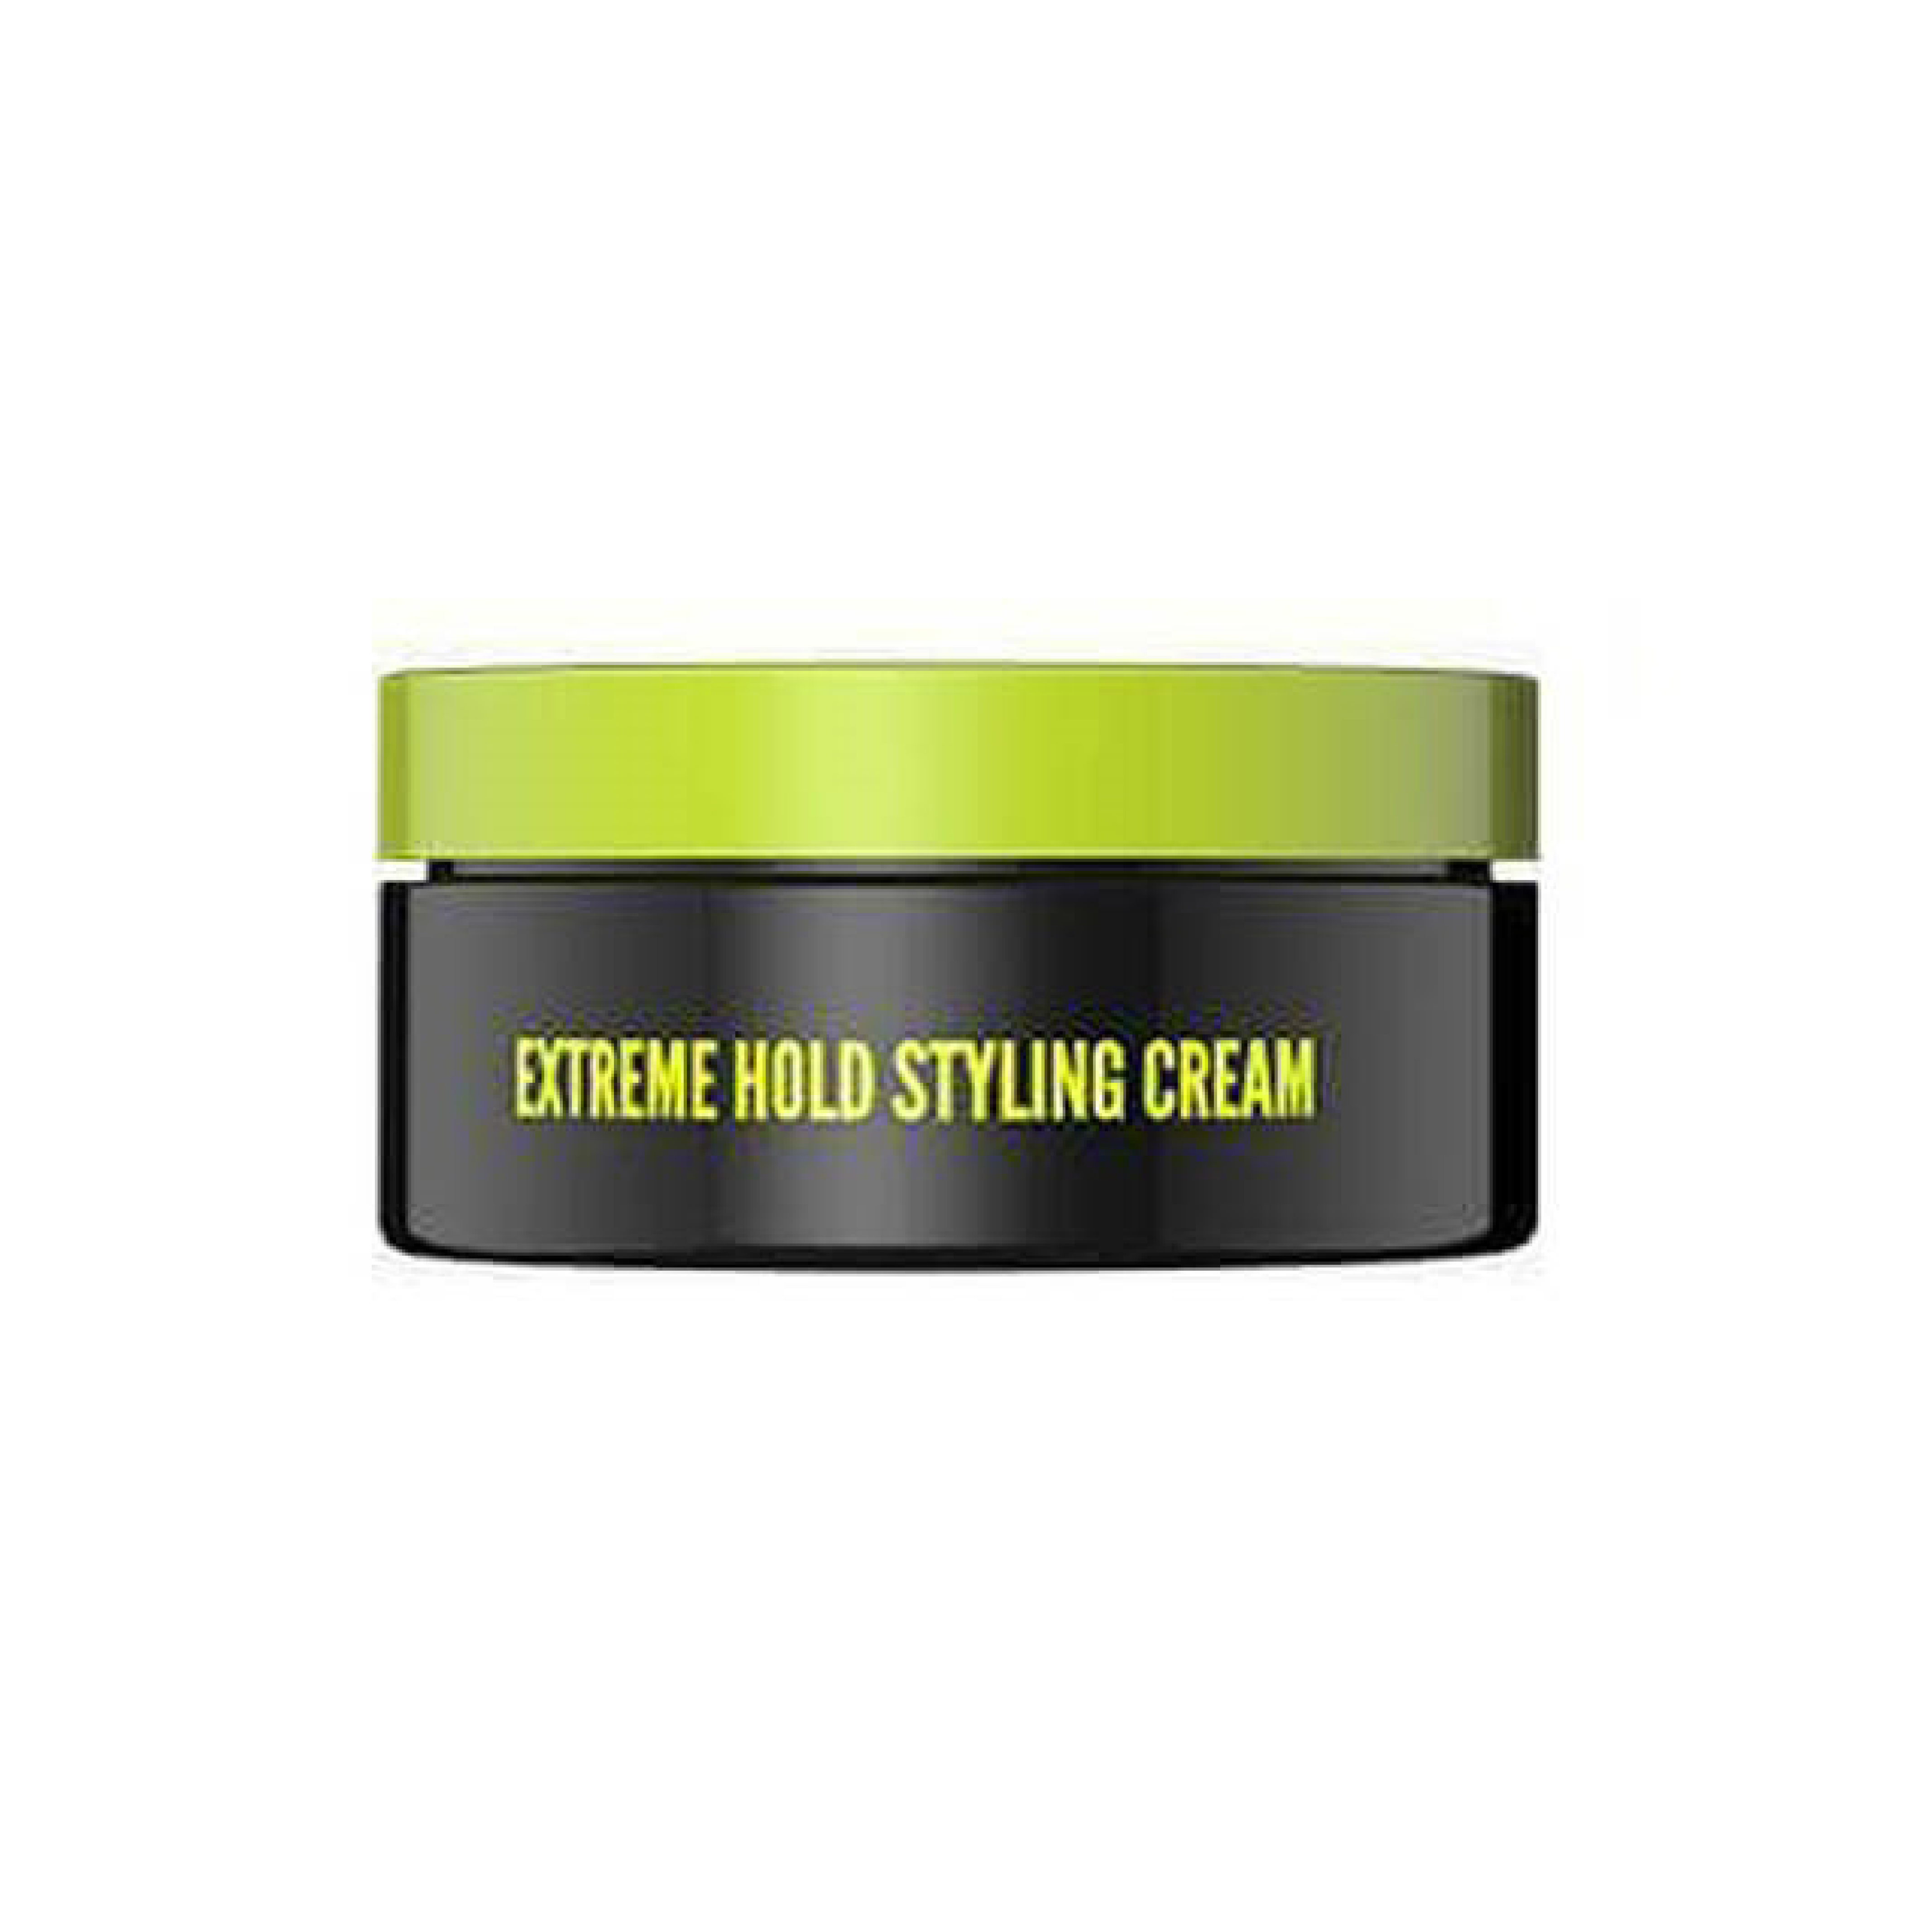 Dfi Extreme Hold Styling Cream - 75g